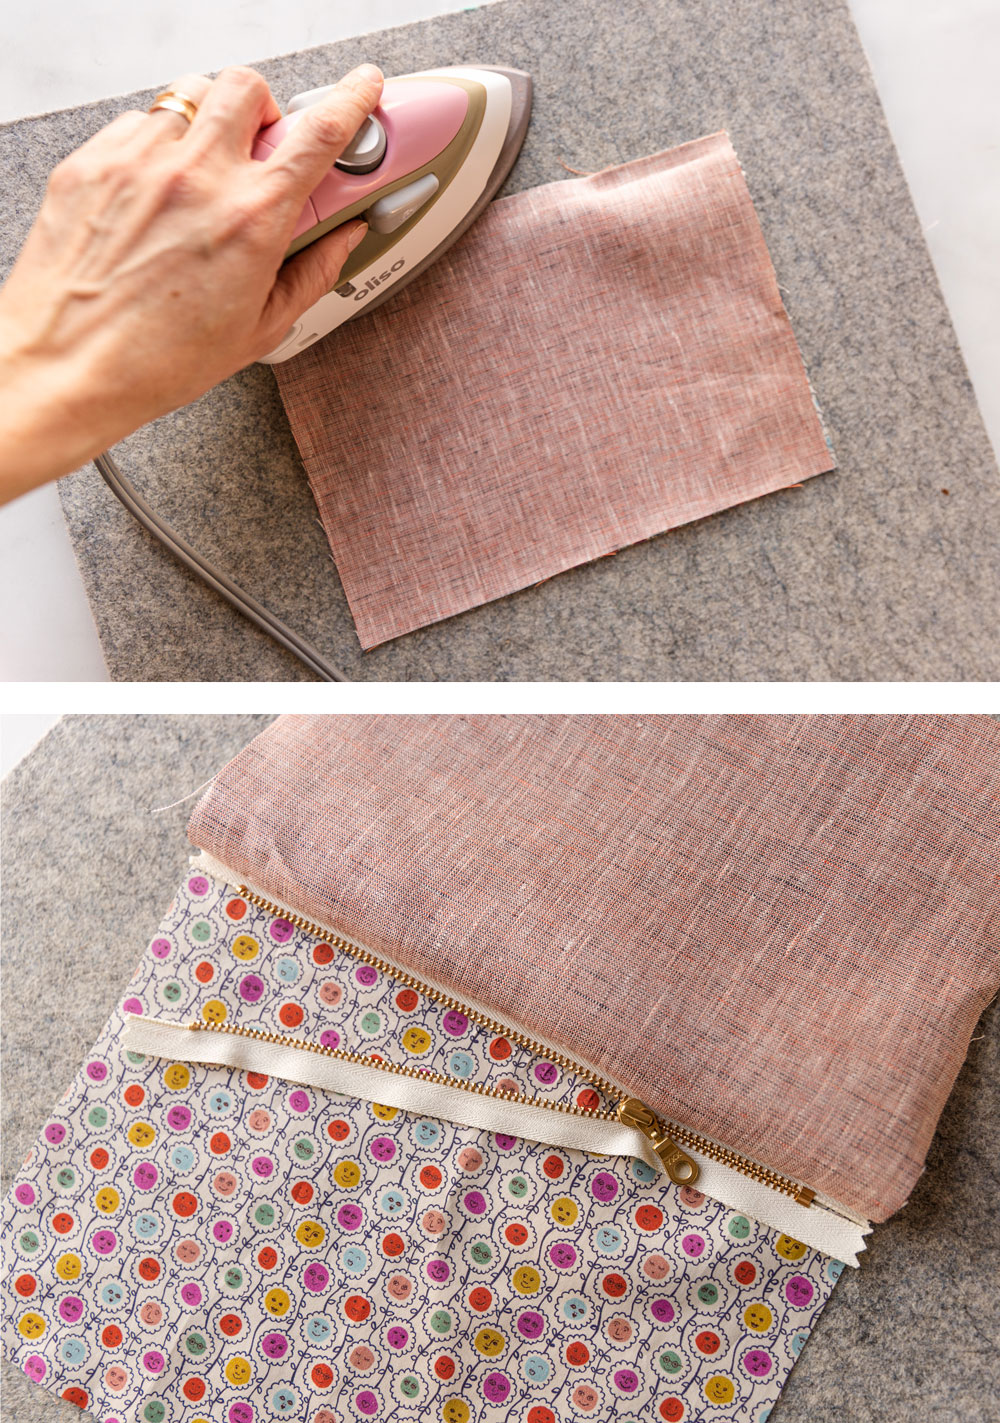 This easy zipper pouch tutorial shows exactly how to sew a simple pouch using scrap fabric and a zipper of any size. suzyquilts.com #zipperpouch #sewingDIY